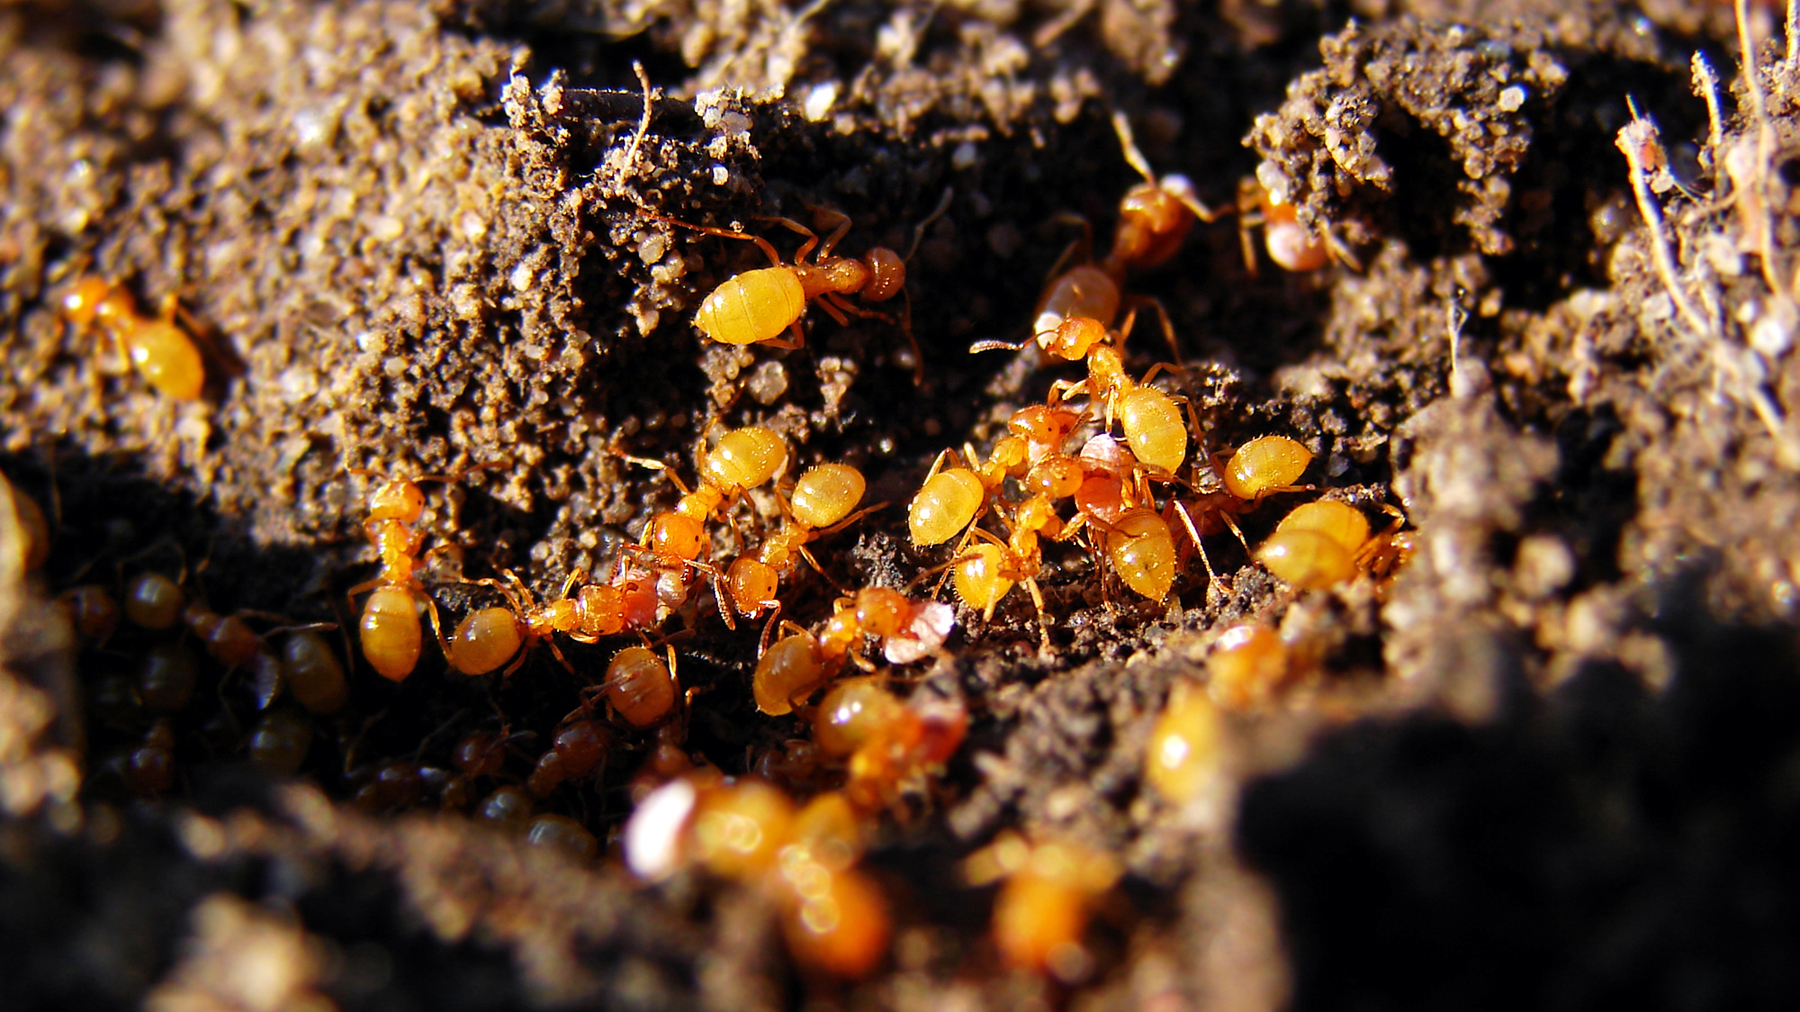 These are 4 mm long lemon ants (citronella ants) from Maryland. They're farming honeydew from mealybugs, the little white insects some are carrying. Photo © Matt Reinbold / Flickr through a Creative Commons license